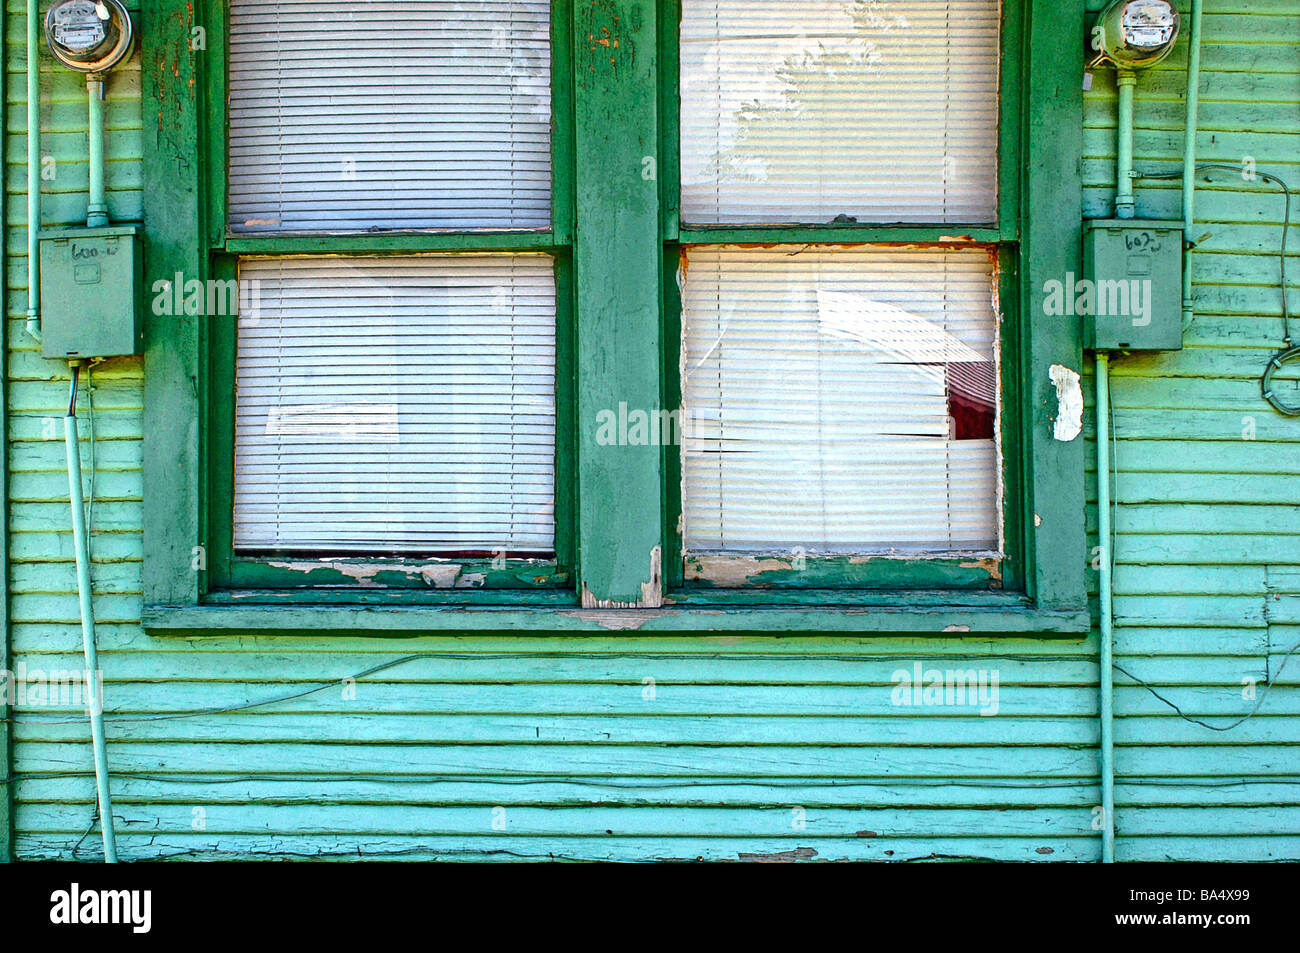 Out dated windows with electrical and communication wires randomly attached Stock Photo